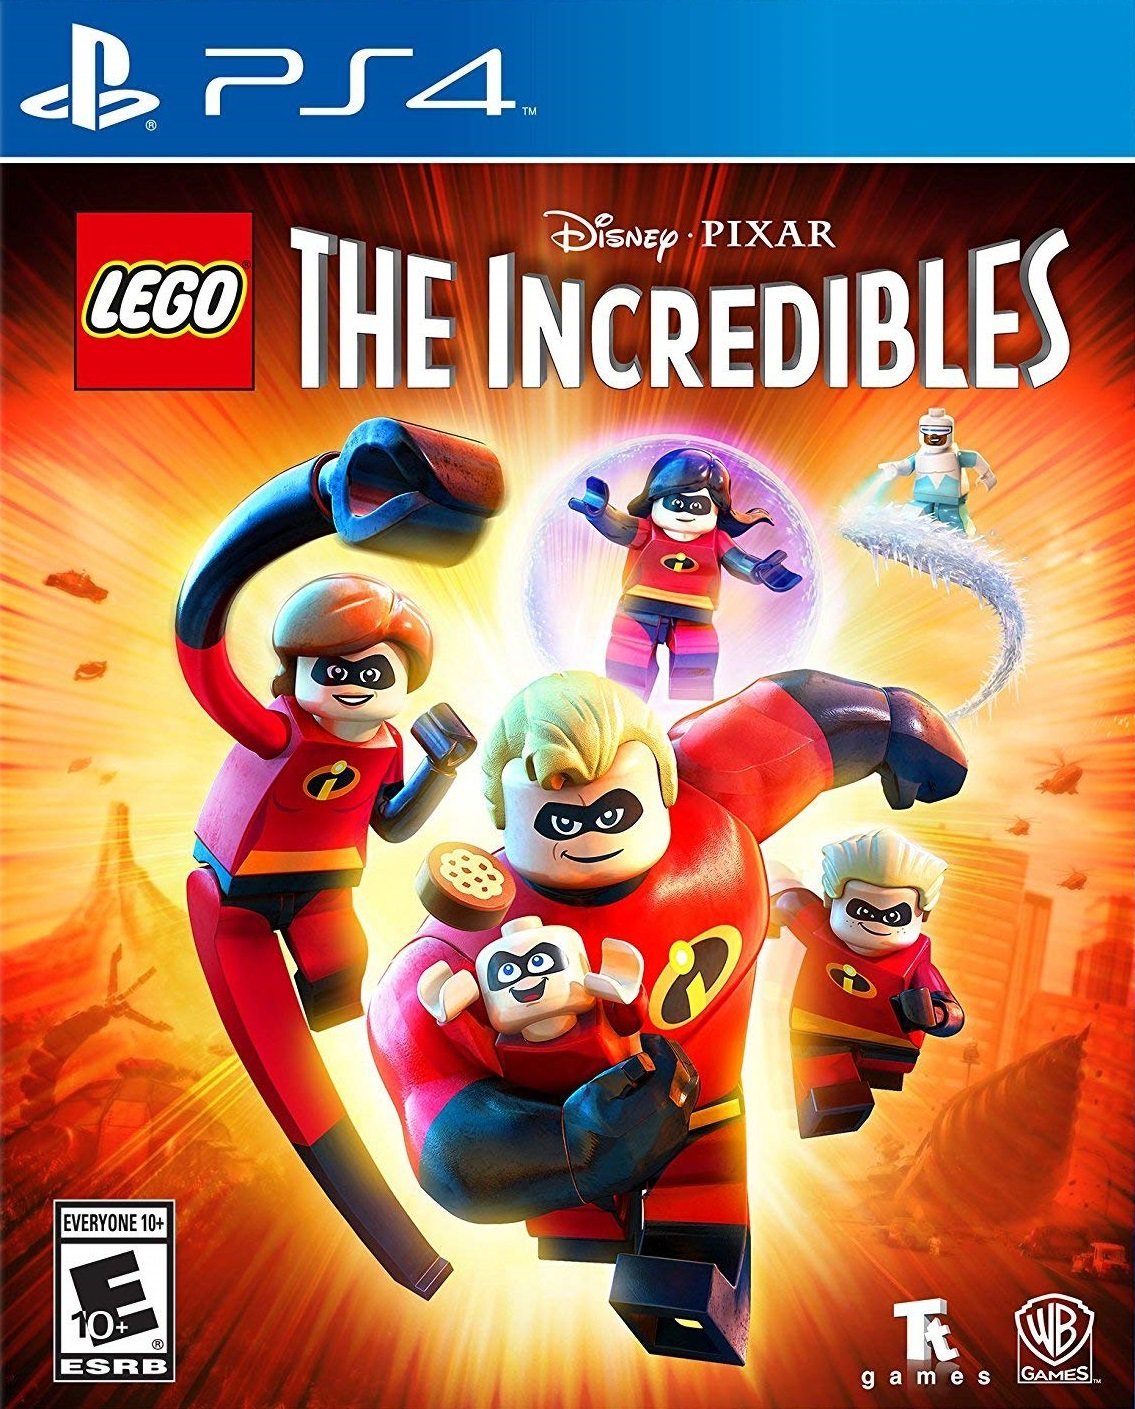 LEGO DISNEY PIXAR'S THE INCREDIBLES PS4 - Easy Video Game